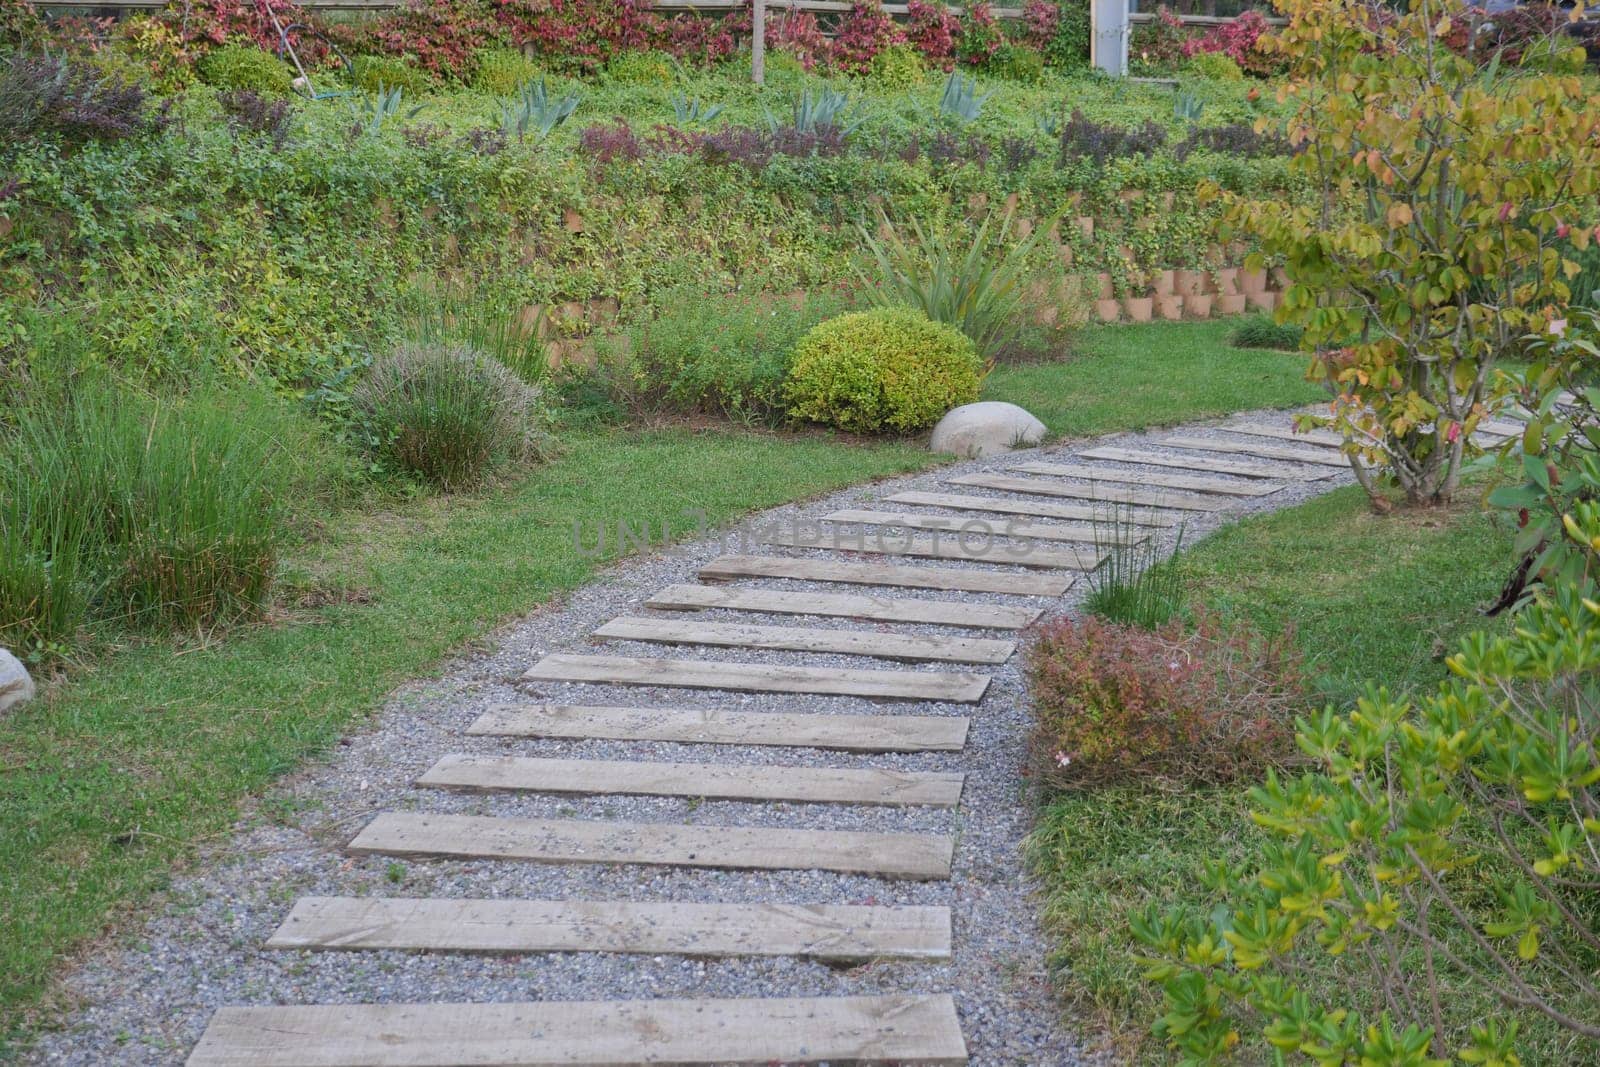 A wooden walkway winding through a natural landscape of grass, trees, and shrubs, providing a peaceful path to explore the garden.